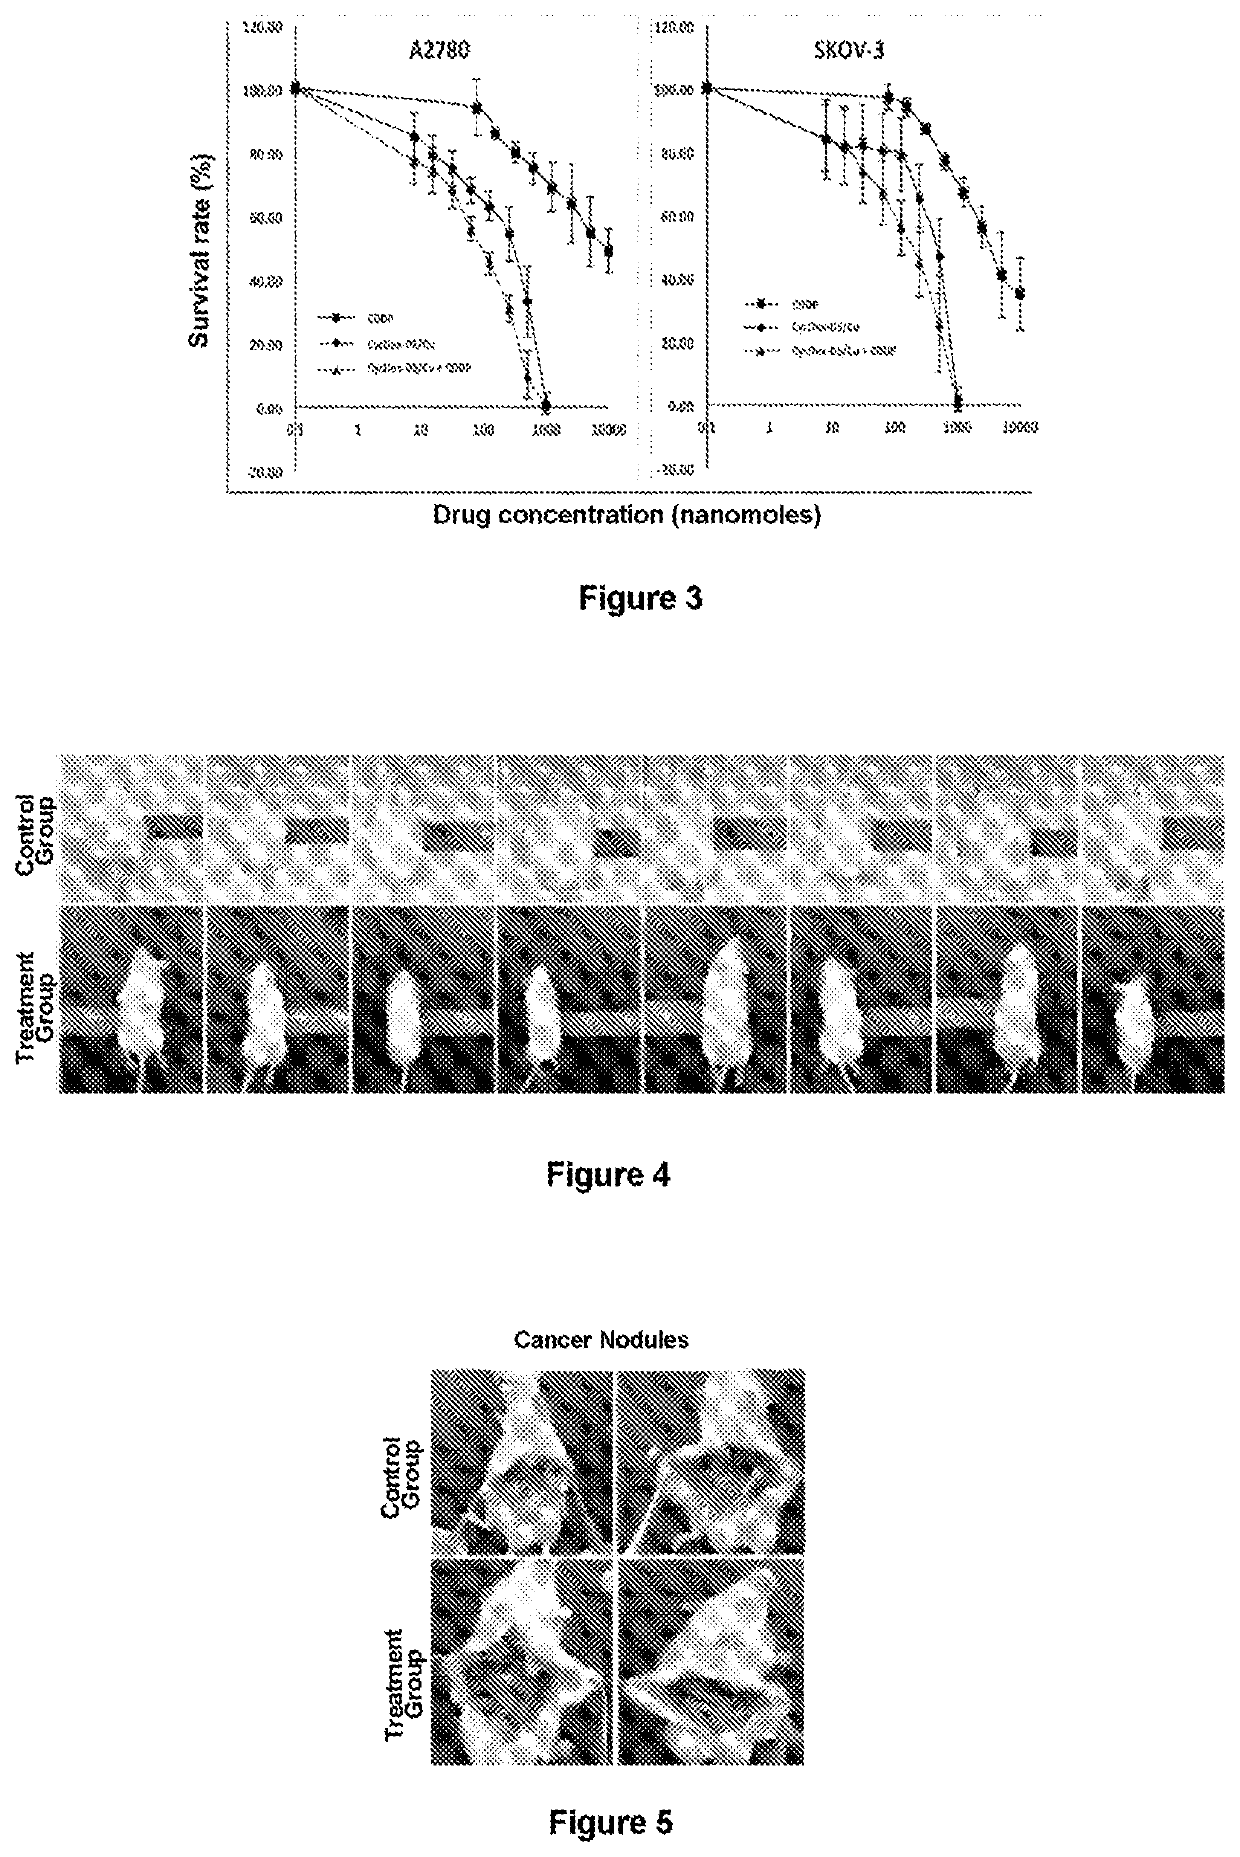 Method for treating pleuroperitoneal membrane cancers by locally injecting disulfiram preparation